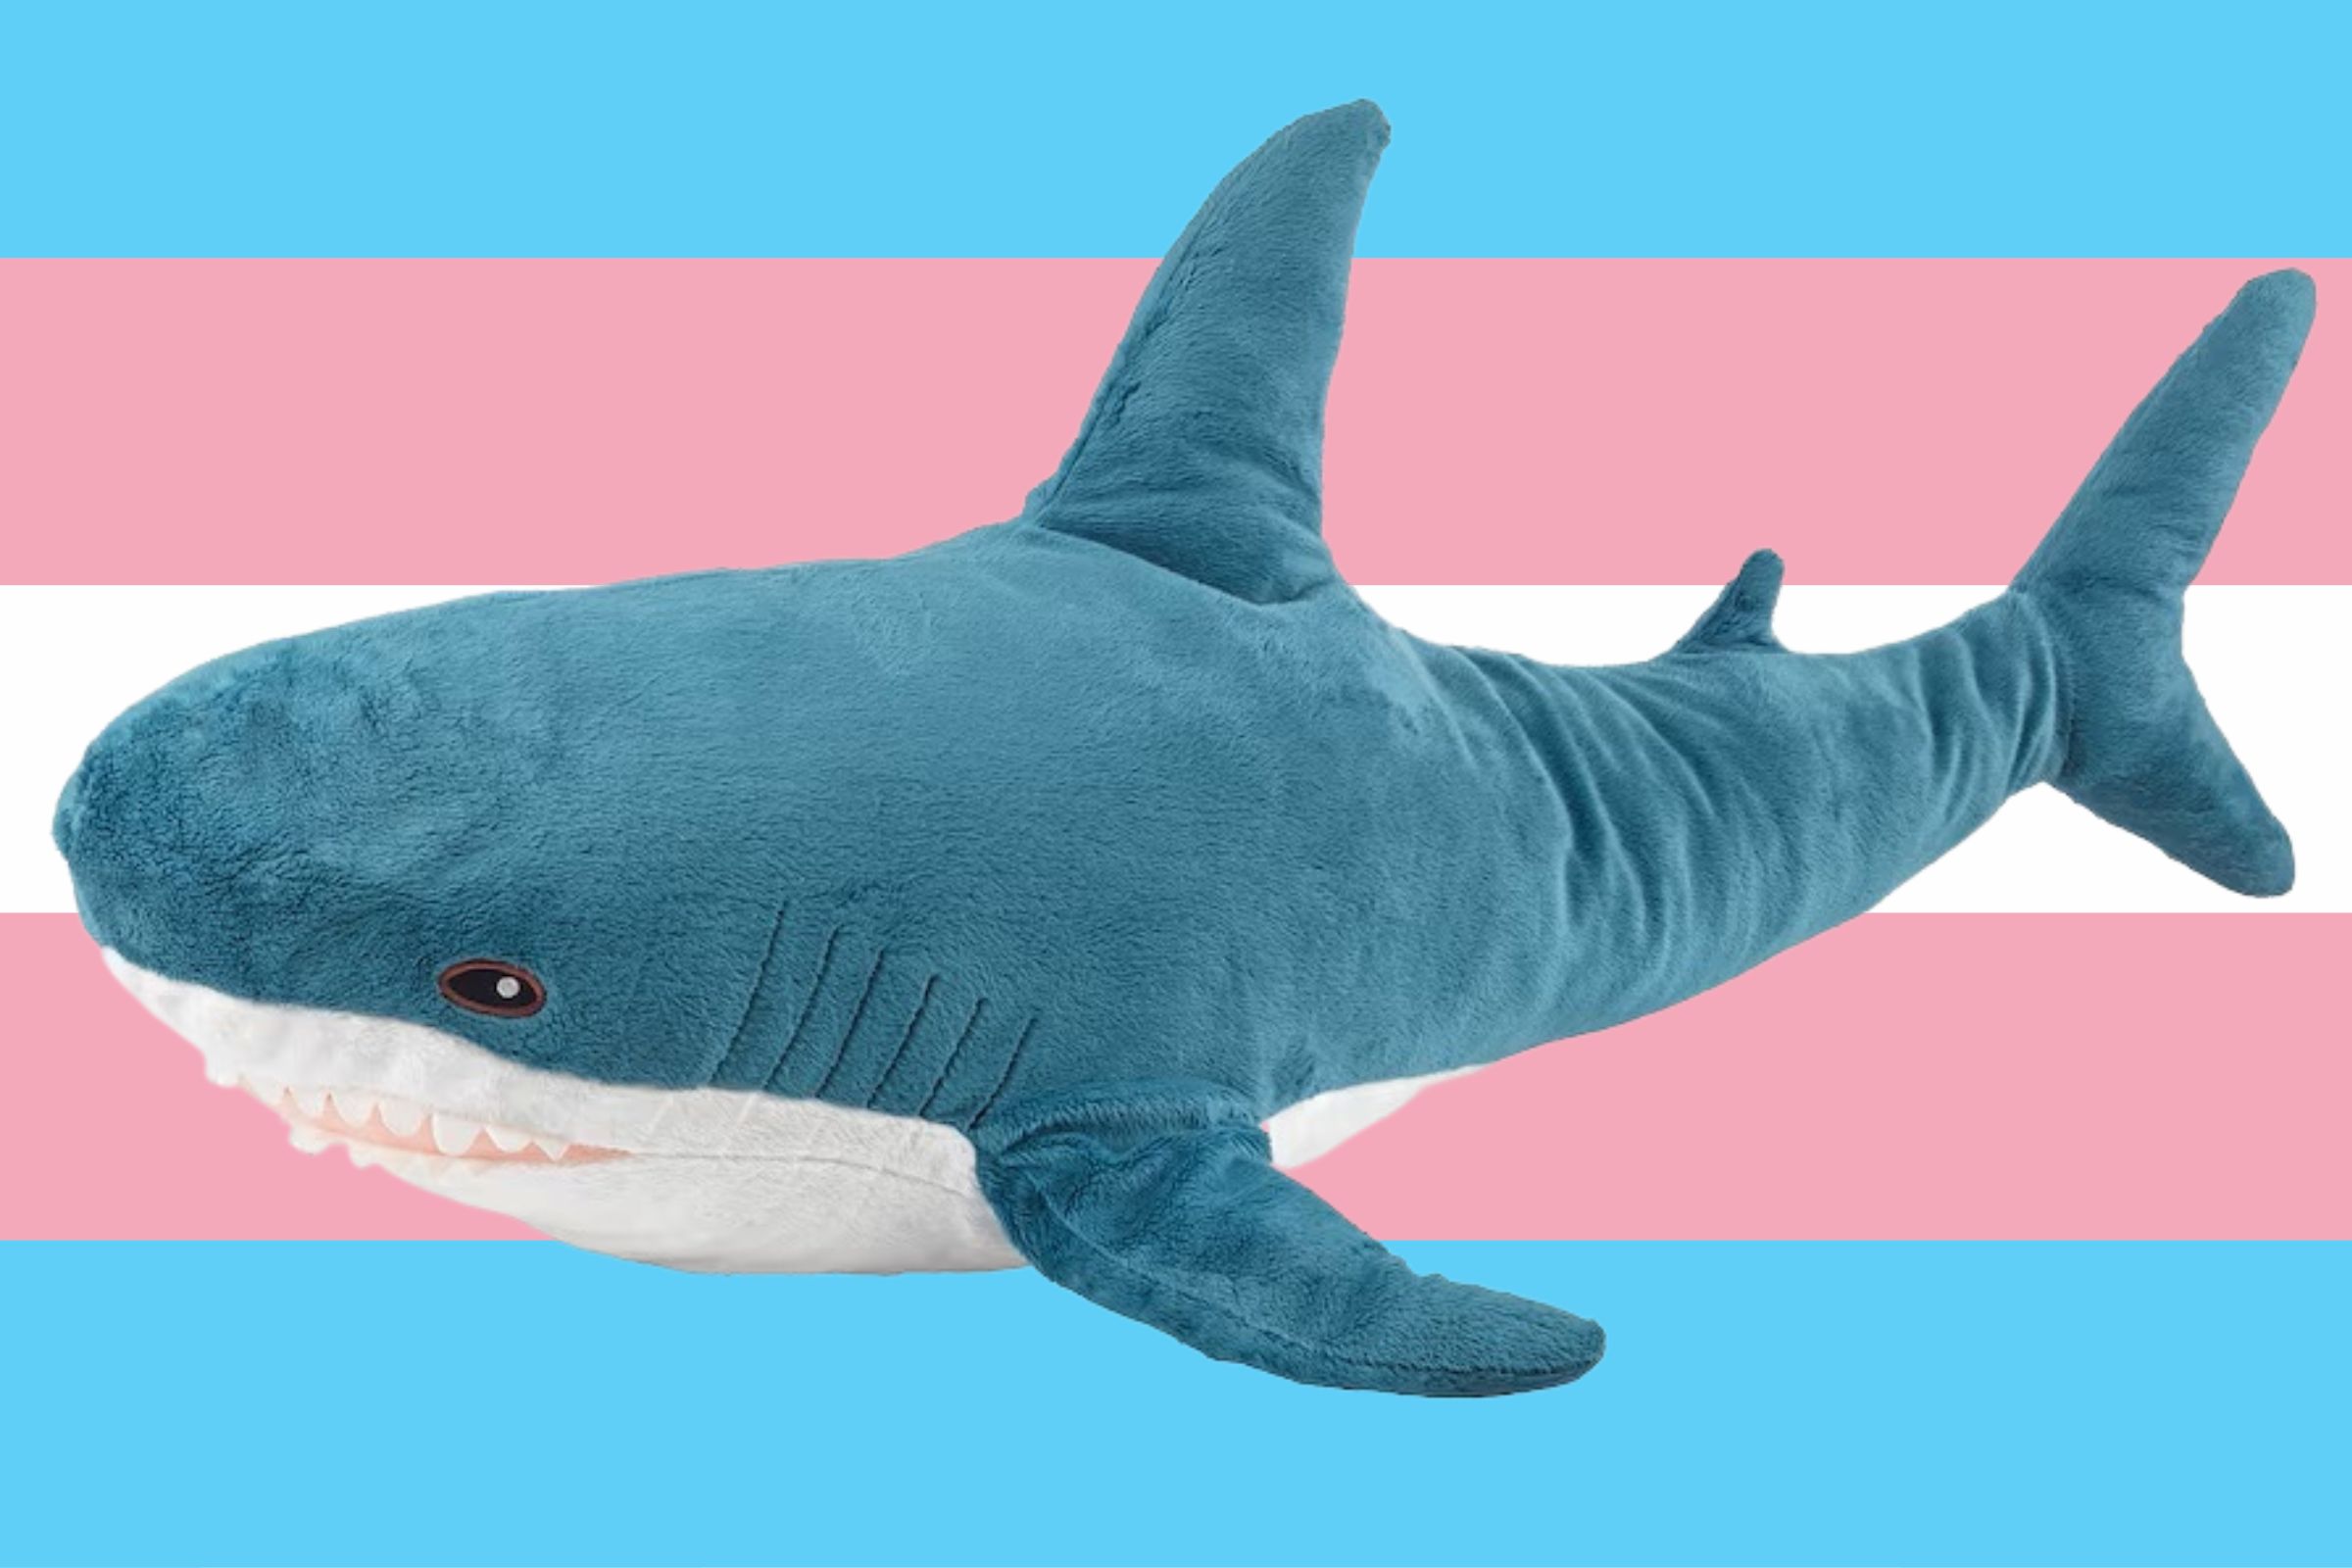 How the IKEA Shark Became a Trans Icon